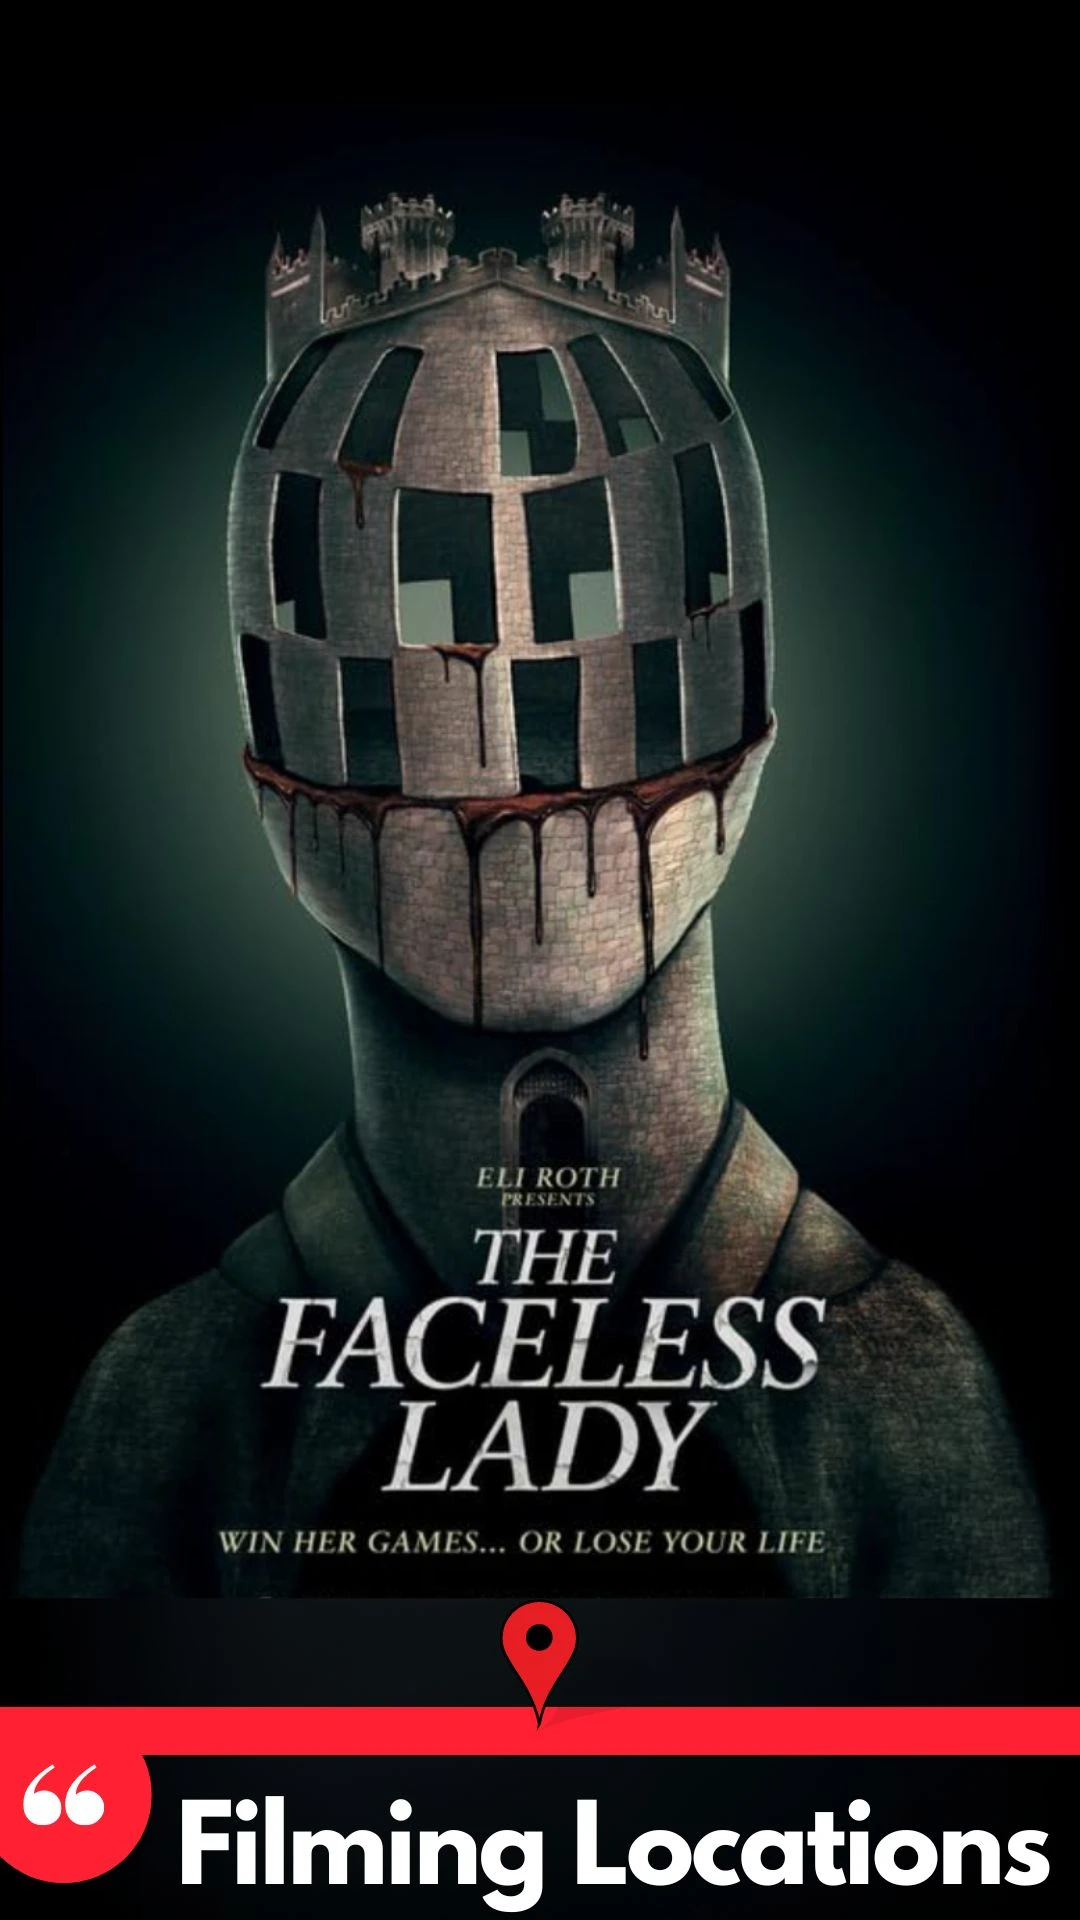 The Faceless Lady Filming Locations